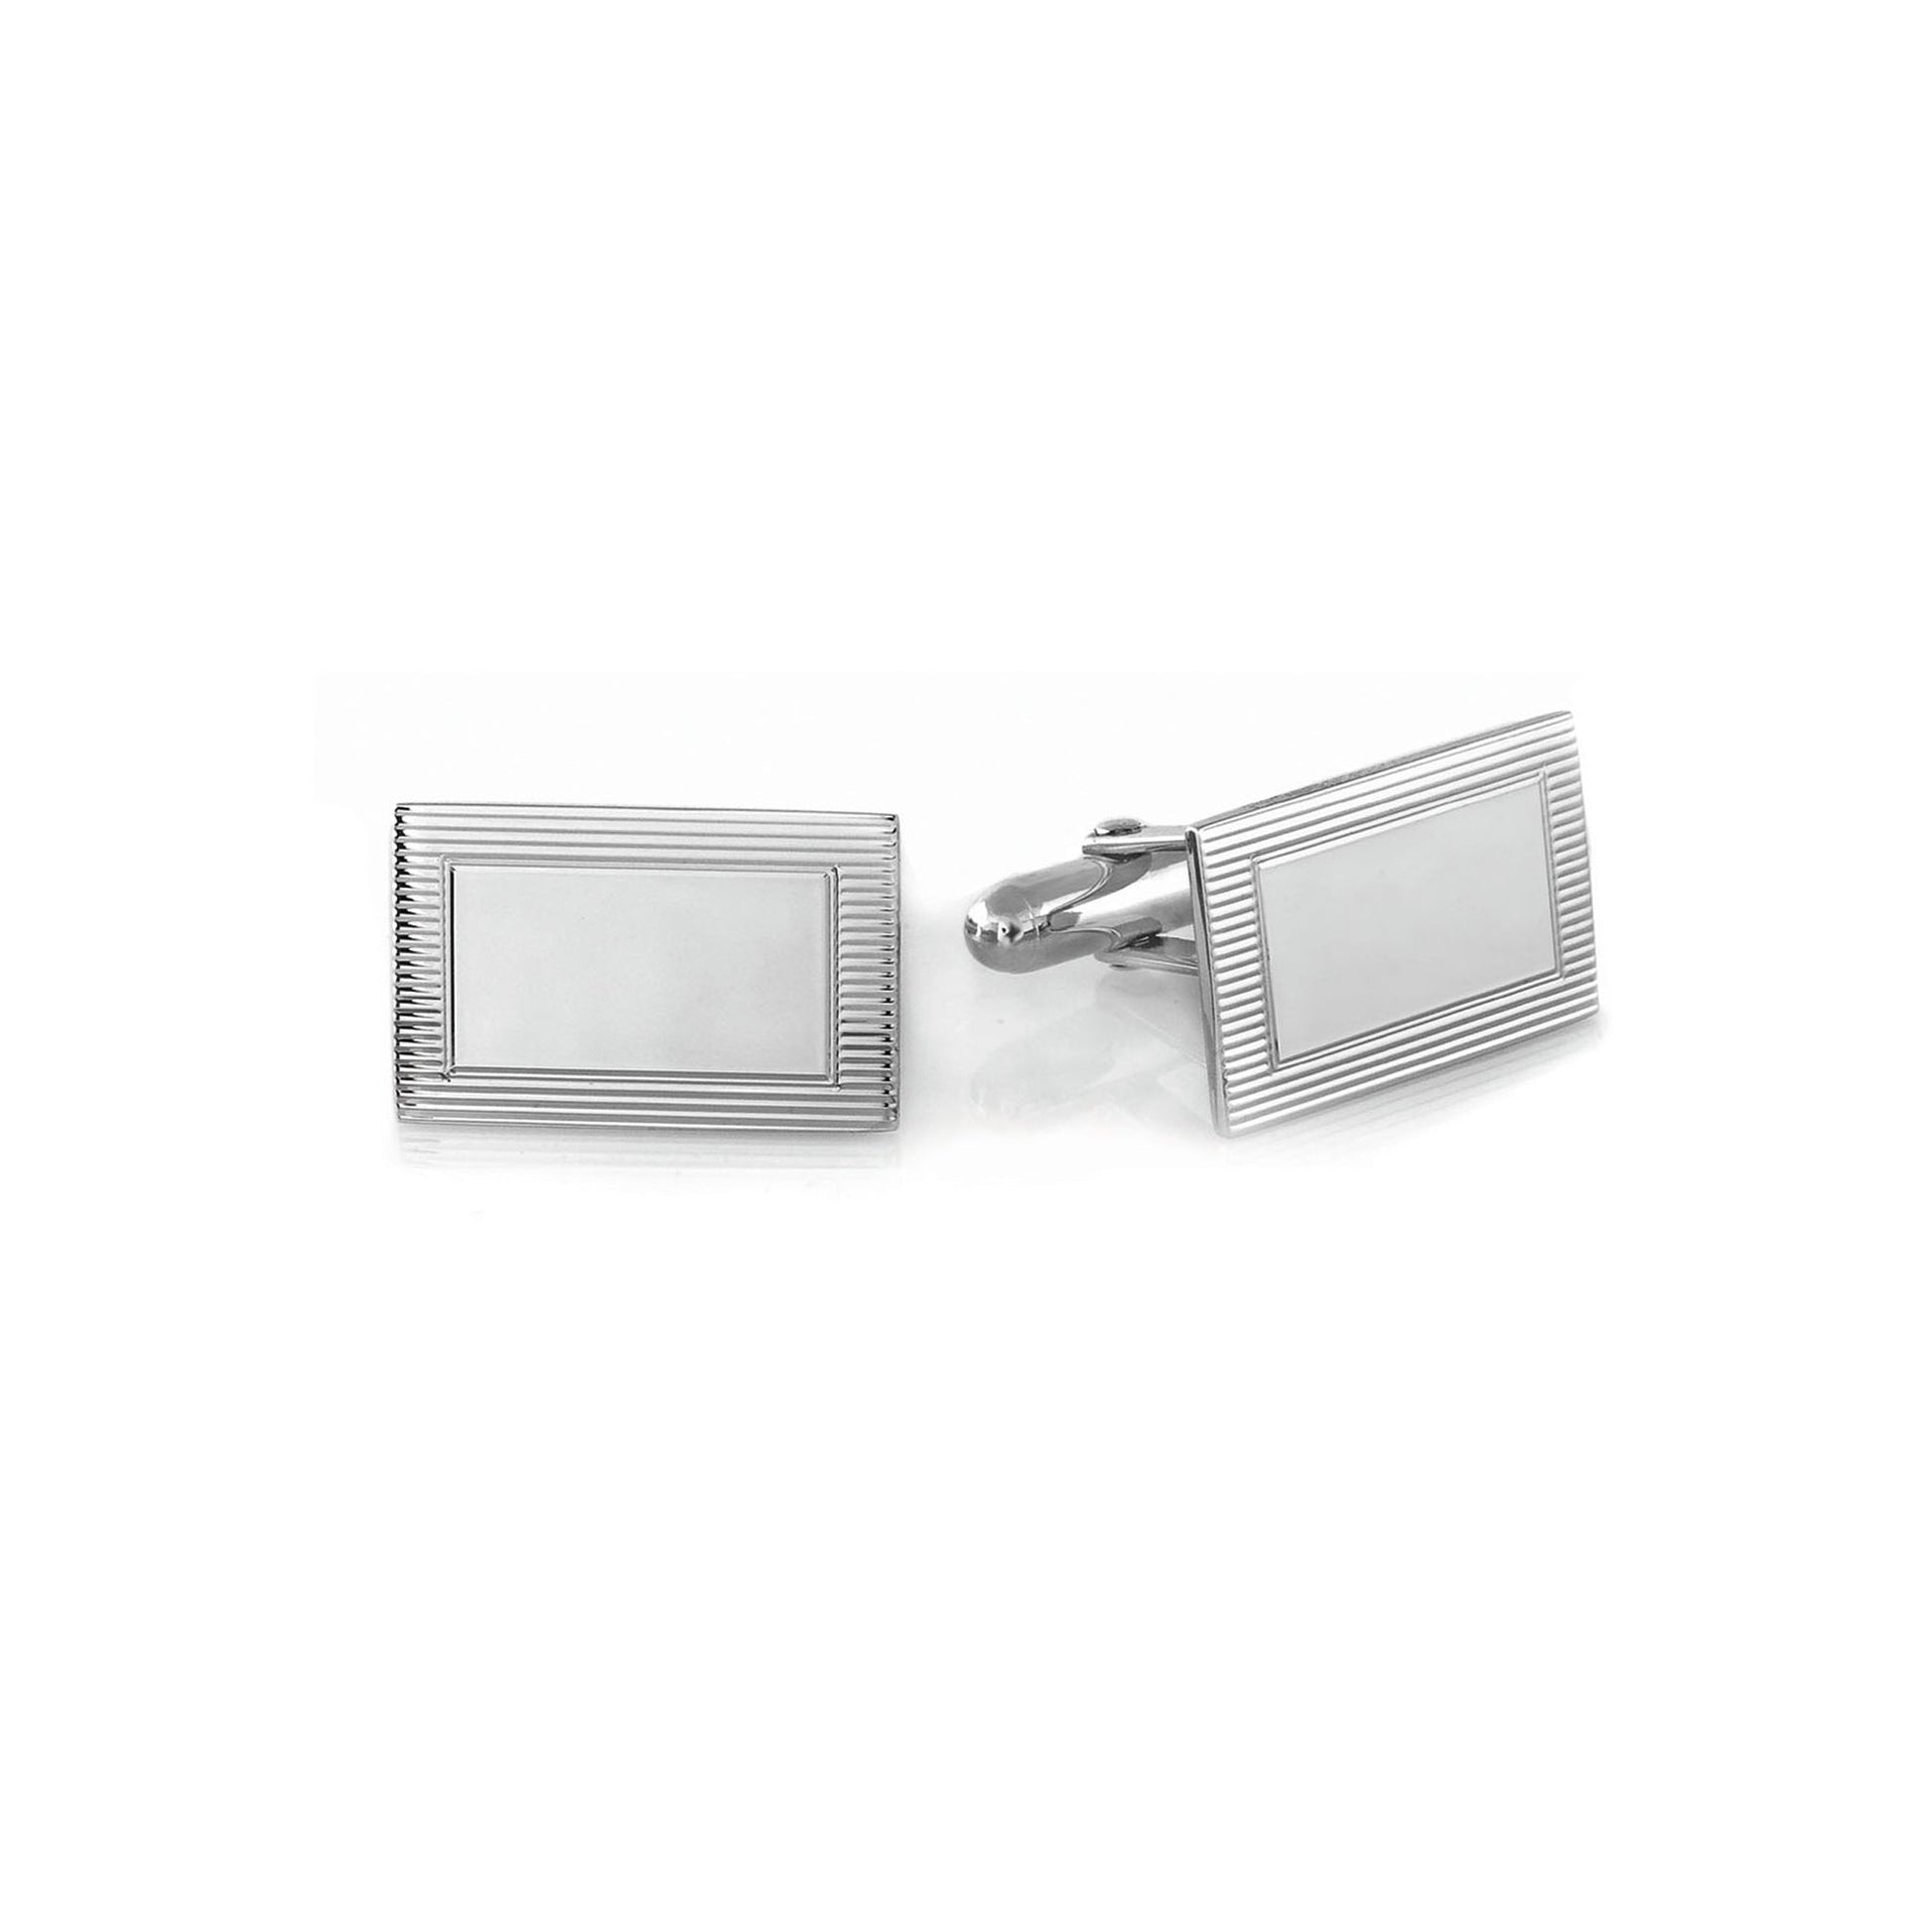 A sterling silver rectangle engine-turned cufflinks displayed on a neutral white background.